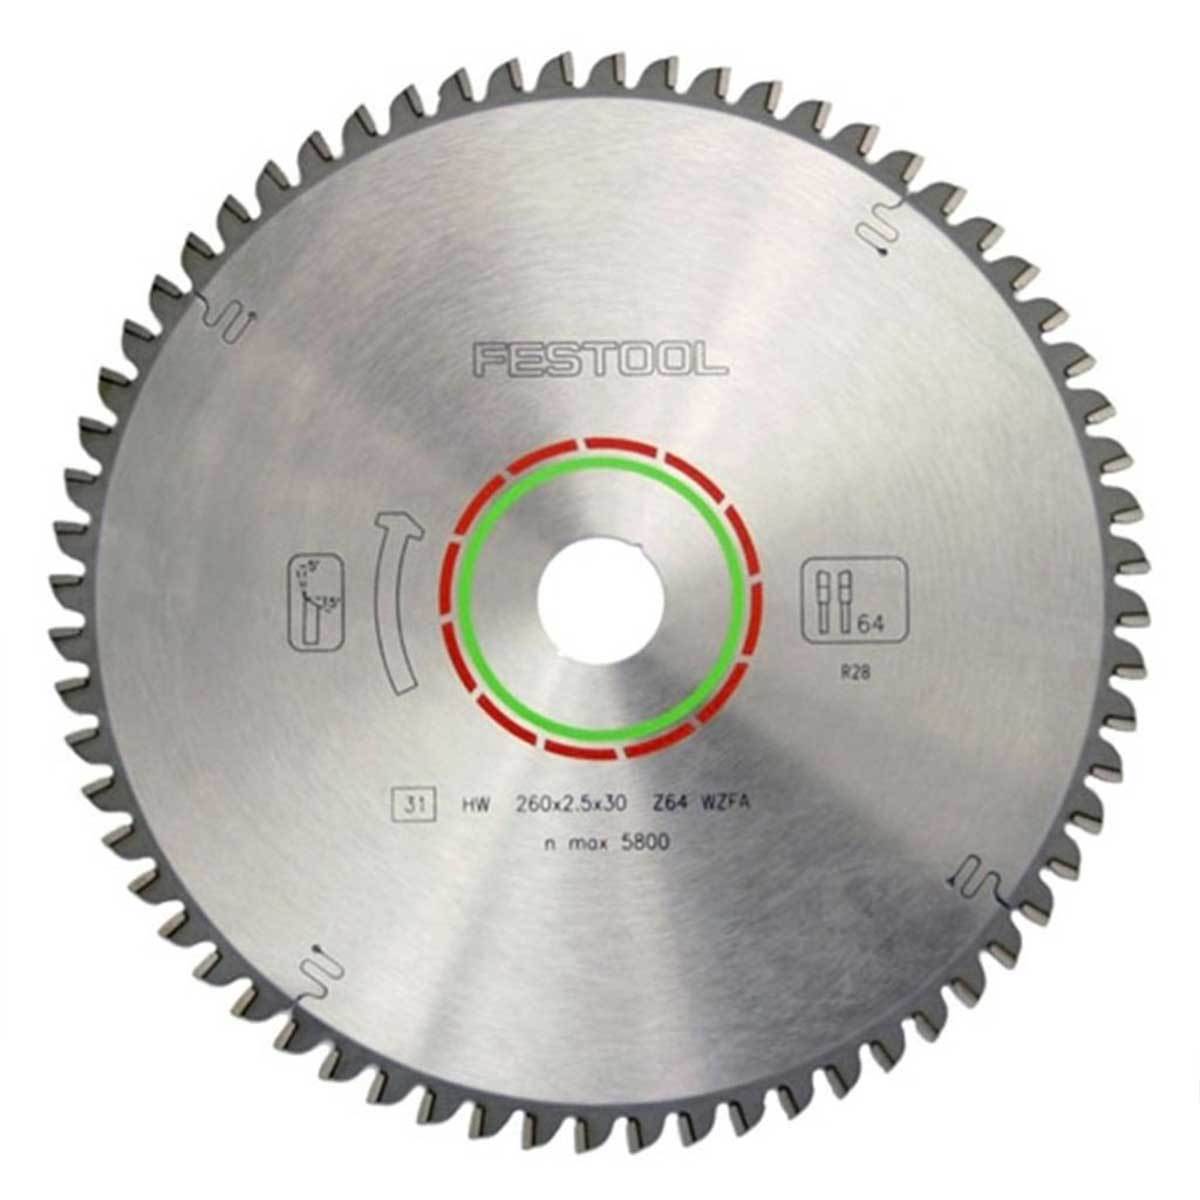 Kapex Saw Blades - For Any Material